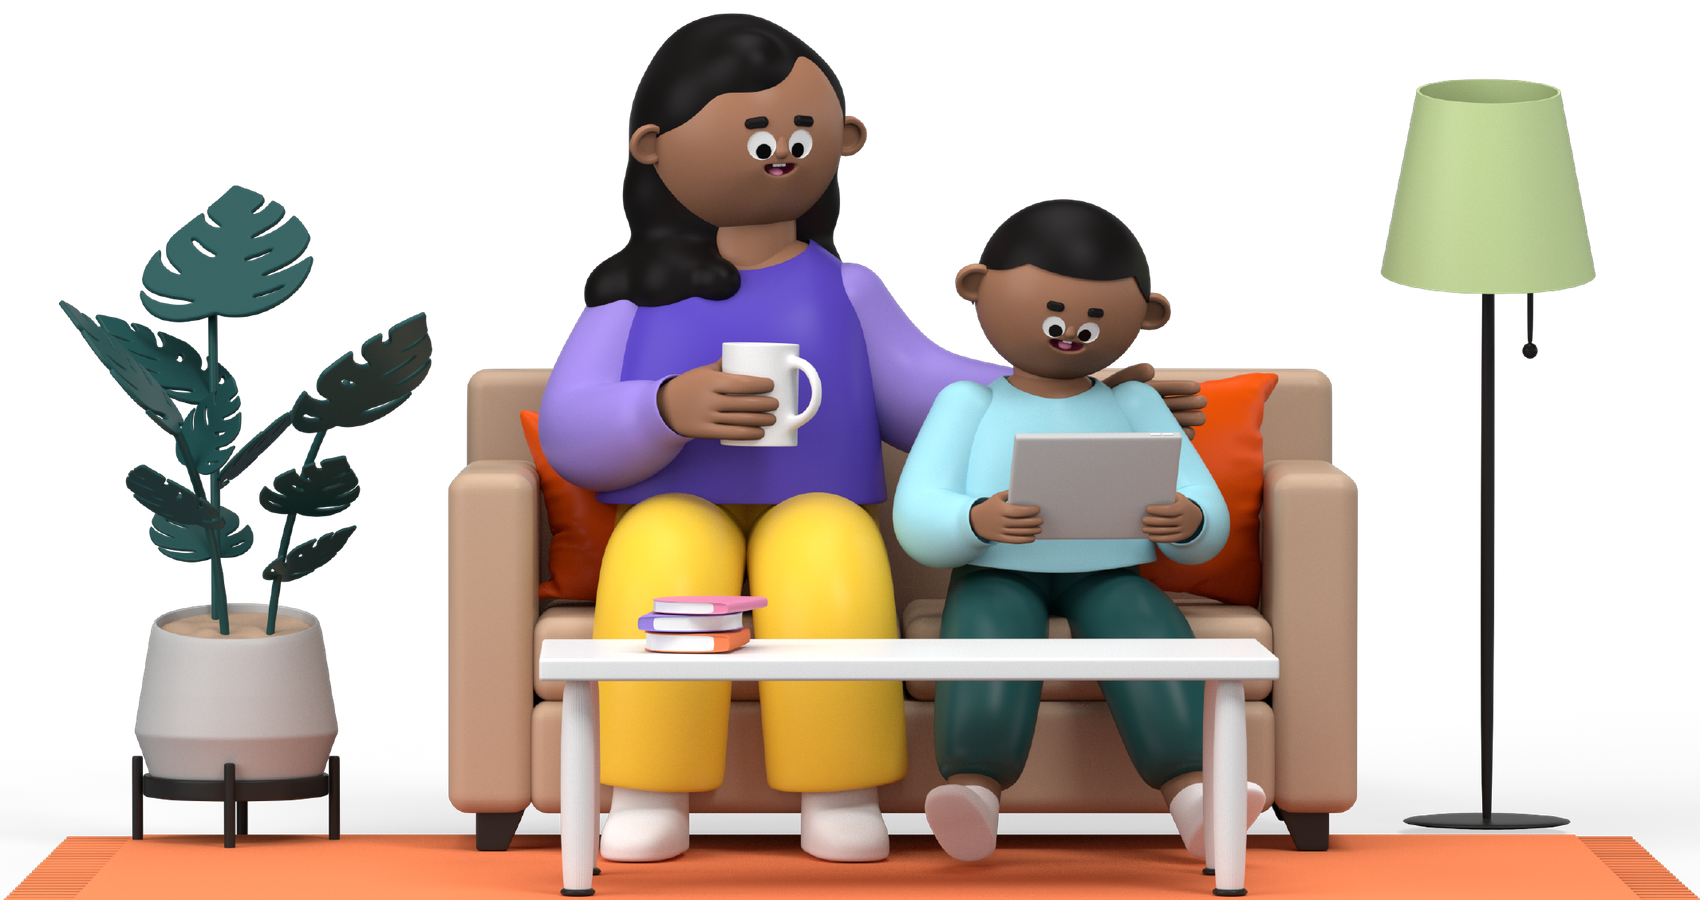 Animation of a mother and her son sitting on a couch using a tablet.